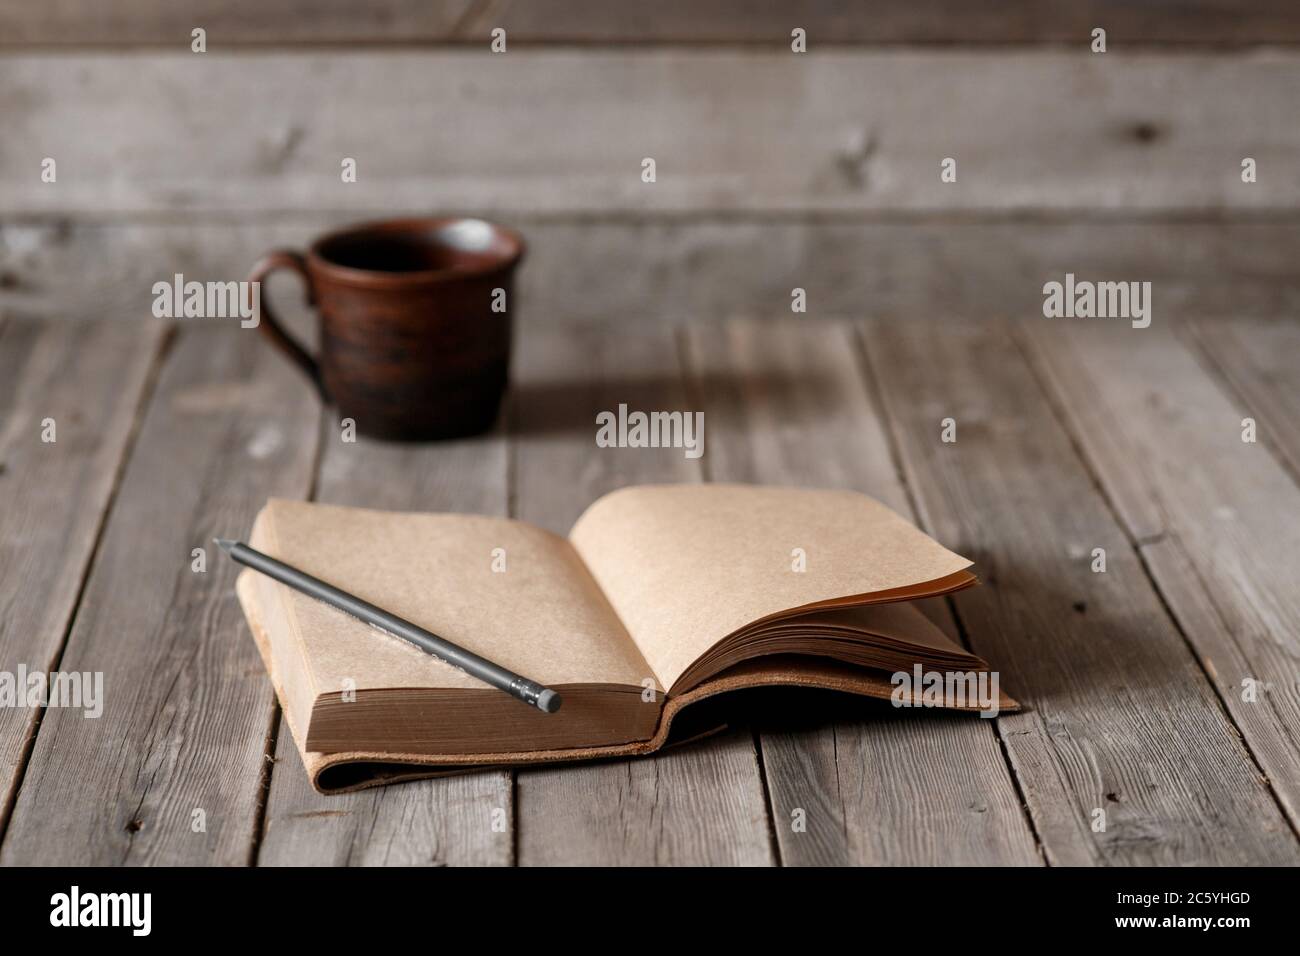 Office desk with blank screen smartphone,pen,notebook and coffee cup on wood table.Top view with copy space.Office supplies and gadgets on desk table.Working desk table concept.Flat lay image. Stock Photo